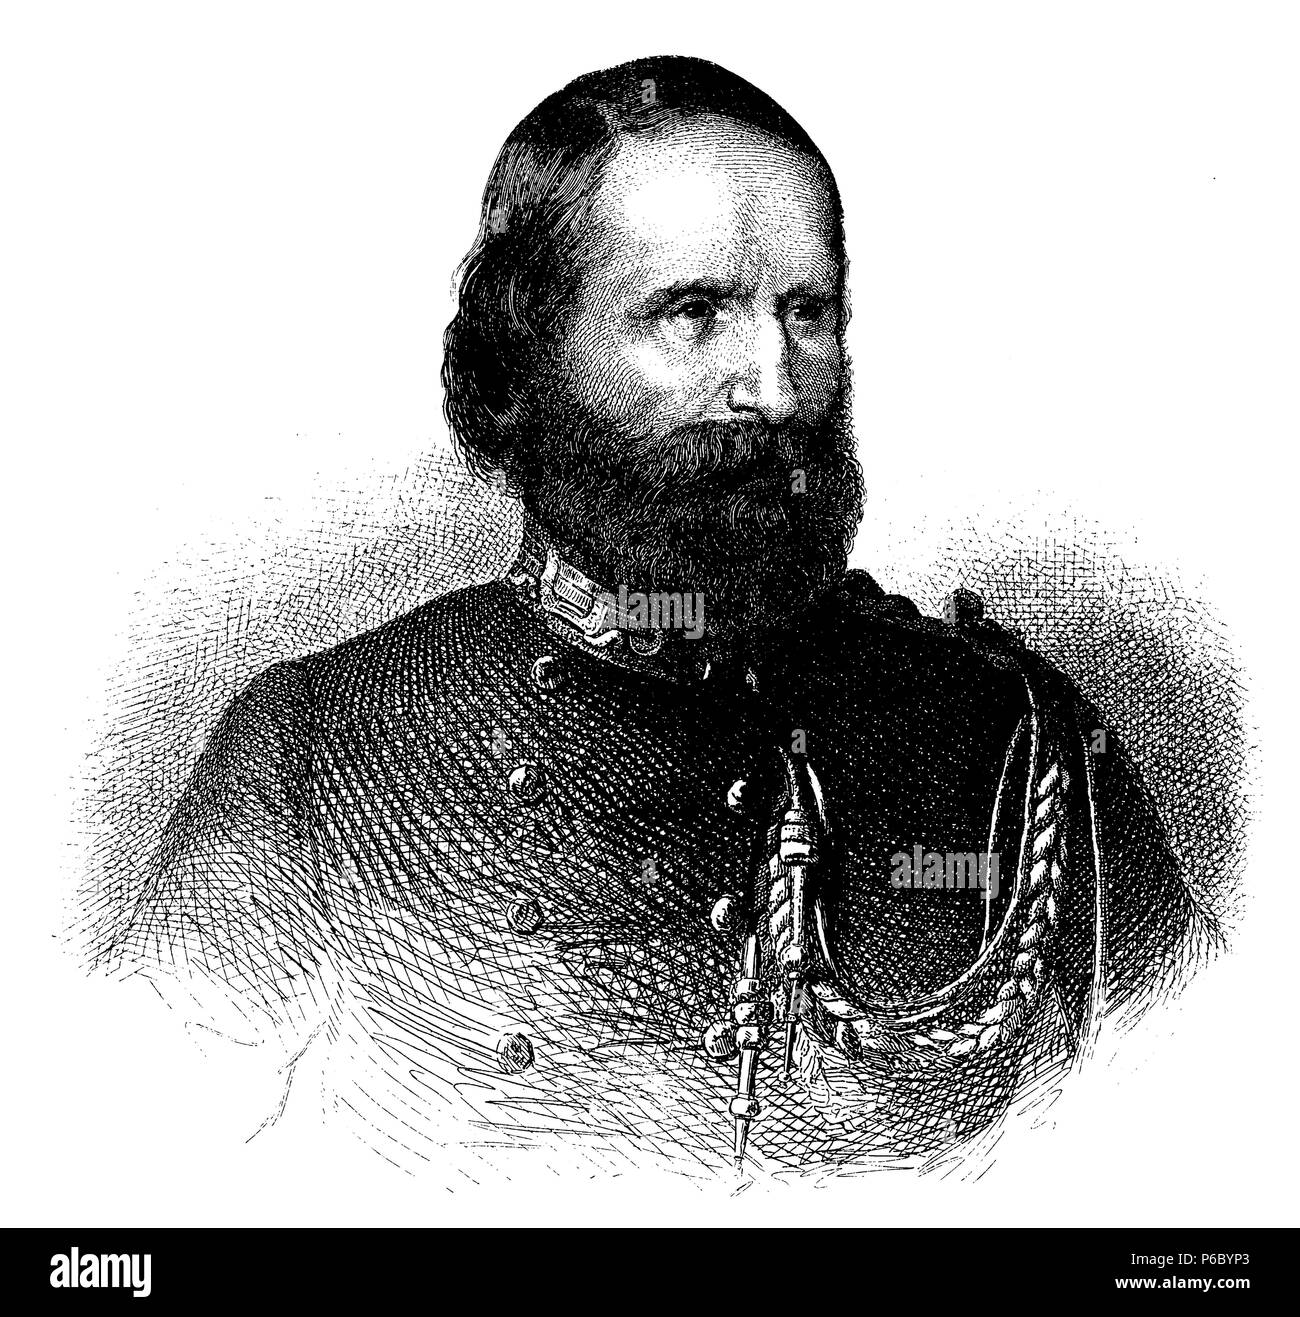 Giuseppe Garibaldi (1807 - 1882), Italian guerrilla fighter and protagonist of the Risorgimento. Drawn and engraved by Metzmacher Verlag by Boussod, Valladon and Cie, Stock Photo